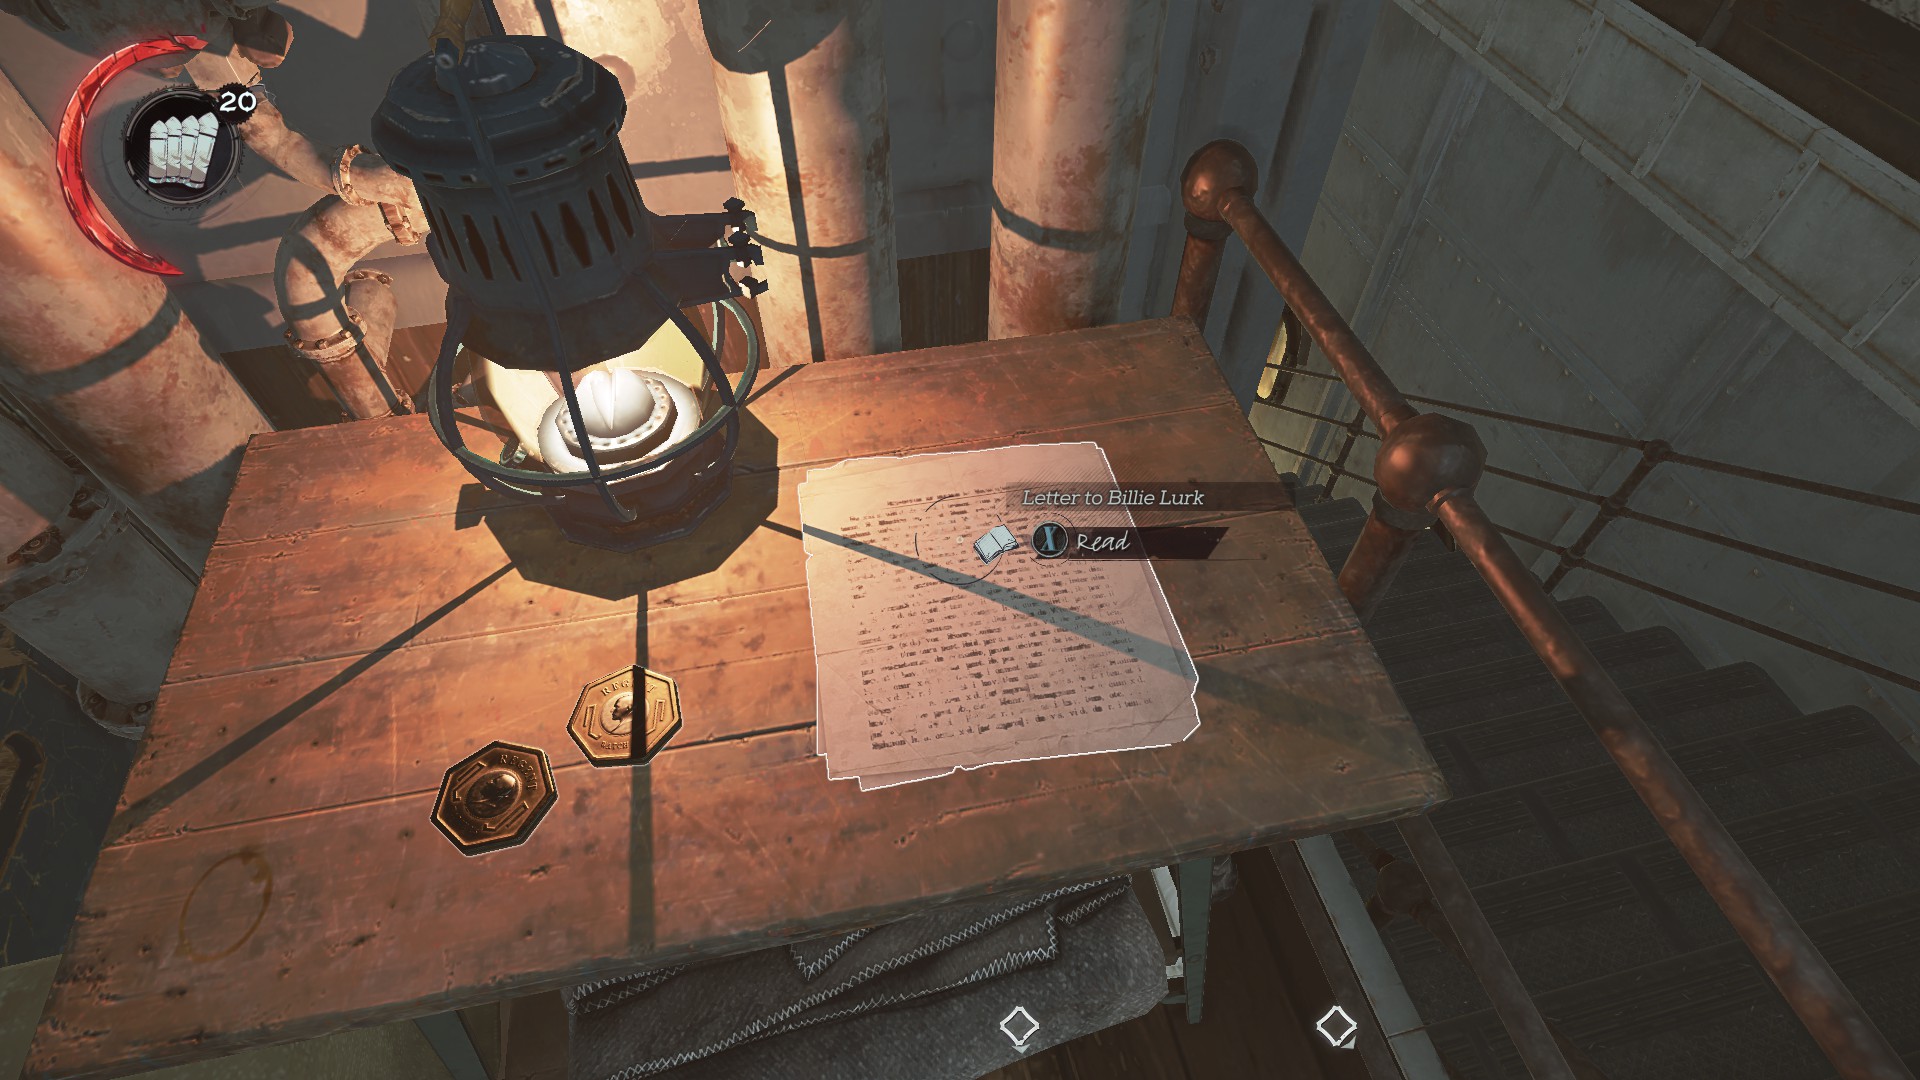 Royal Spymaster achievement in Dishonored 2